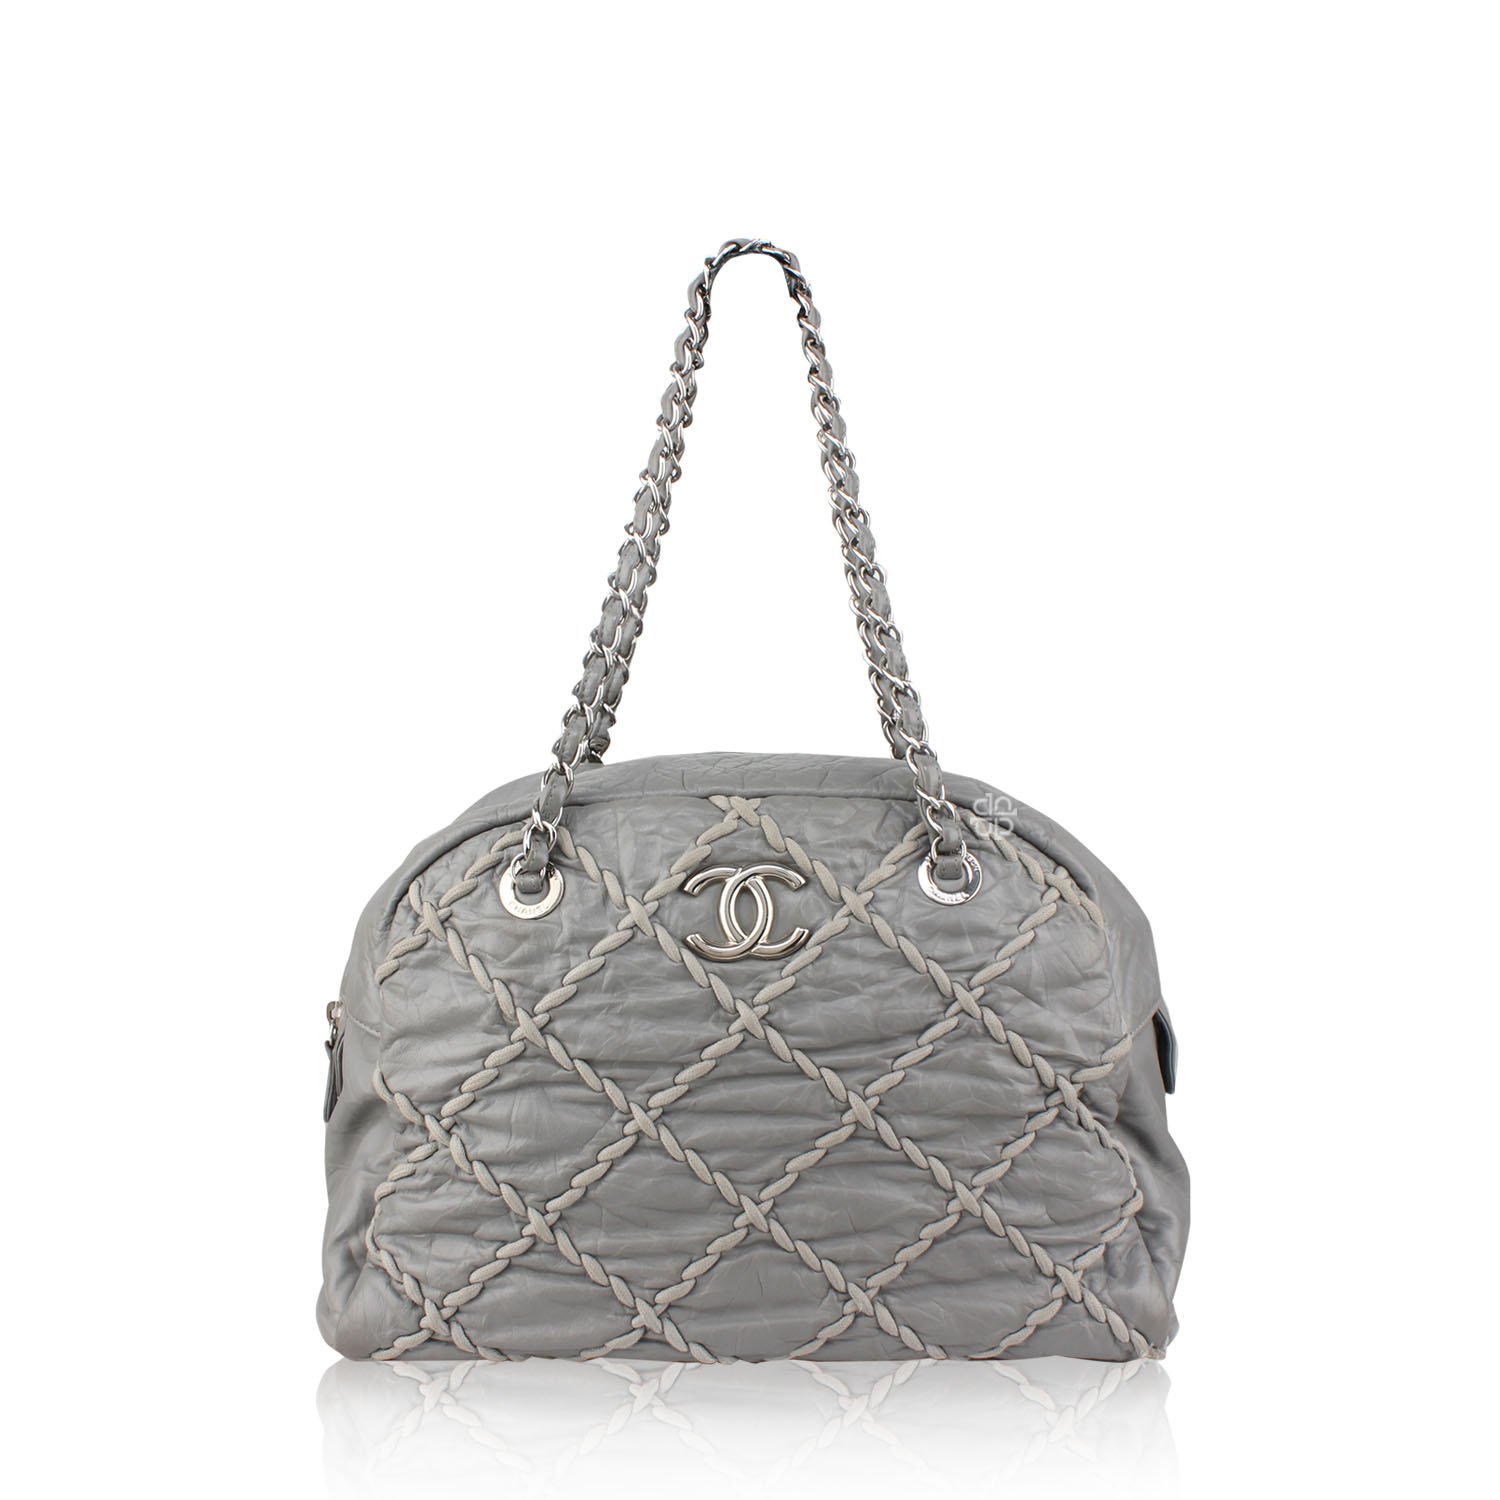 Chanel Bubble Bowler Bag in Grey Quilted Lambskin.jpg